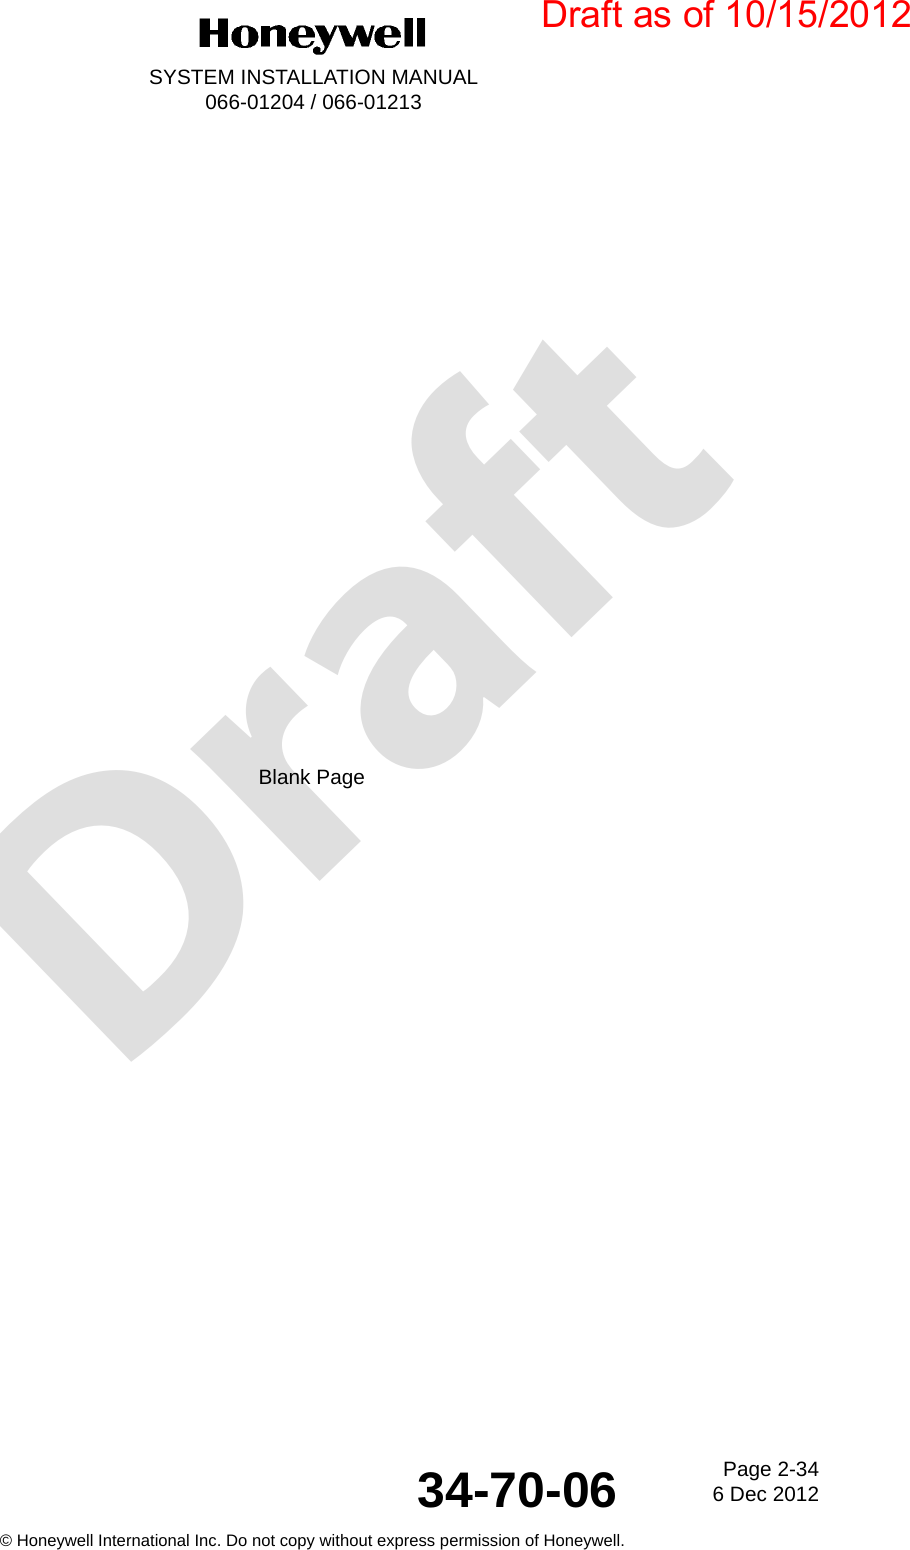 DraftPage 2-346 Dec 201234-70-06SYSTEM INSTALLATION MANUAL066-01204 / 066-01213© Honeywell International Inc. Do not copy without express permission of Honeywell.Blank PageDraft as of 10/15/2012